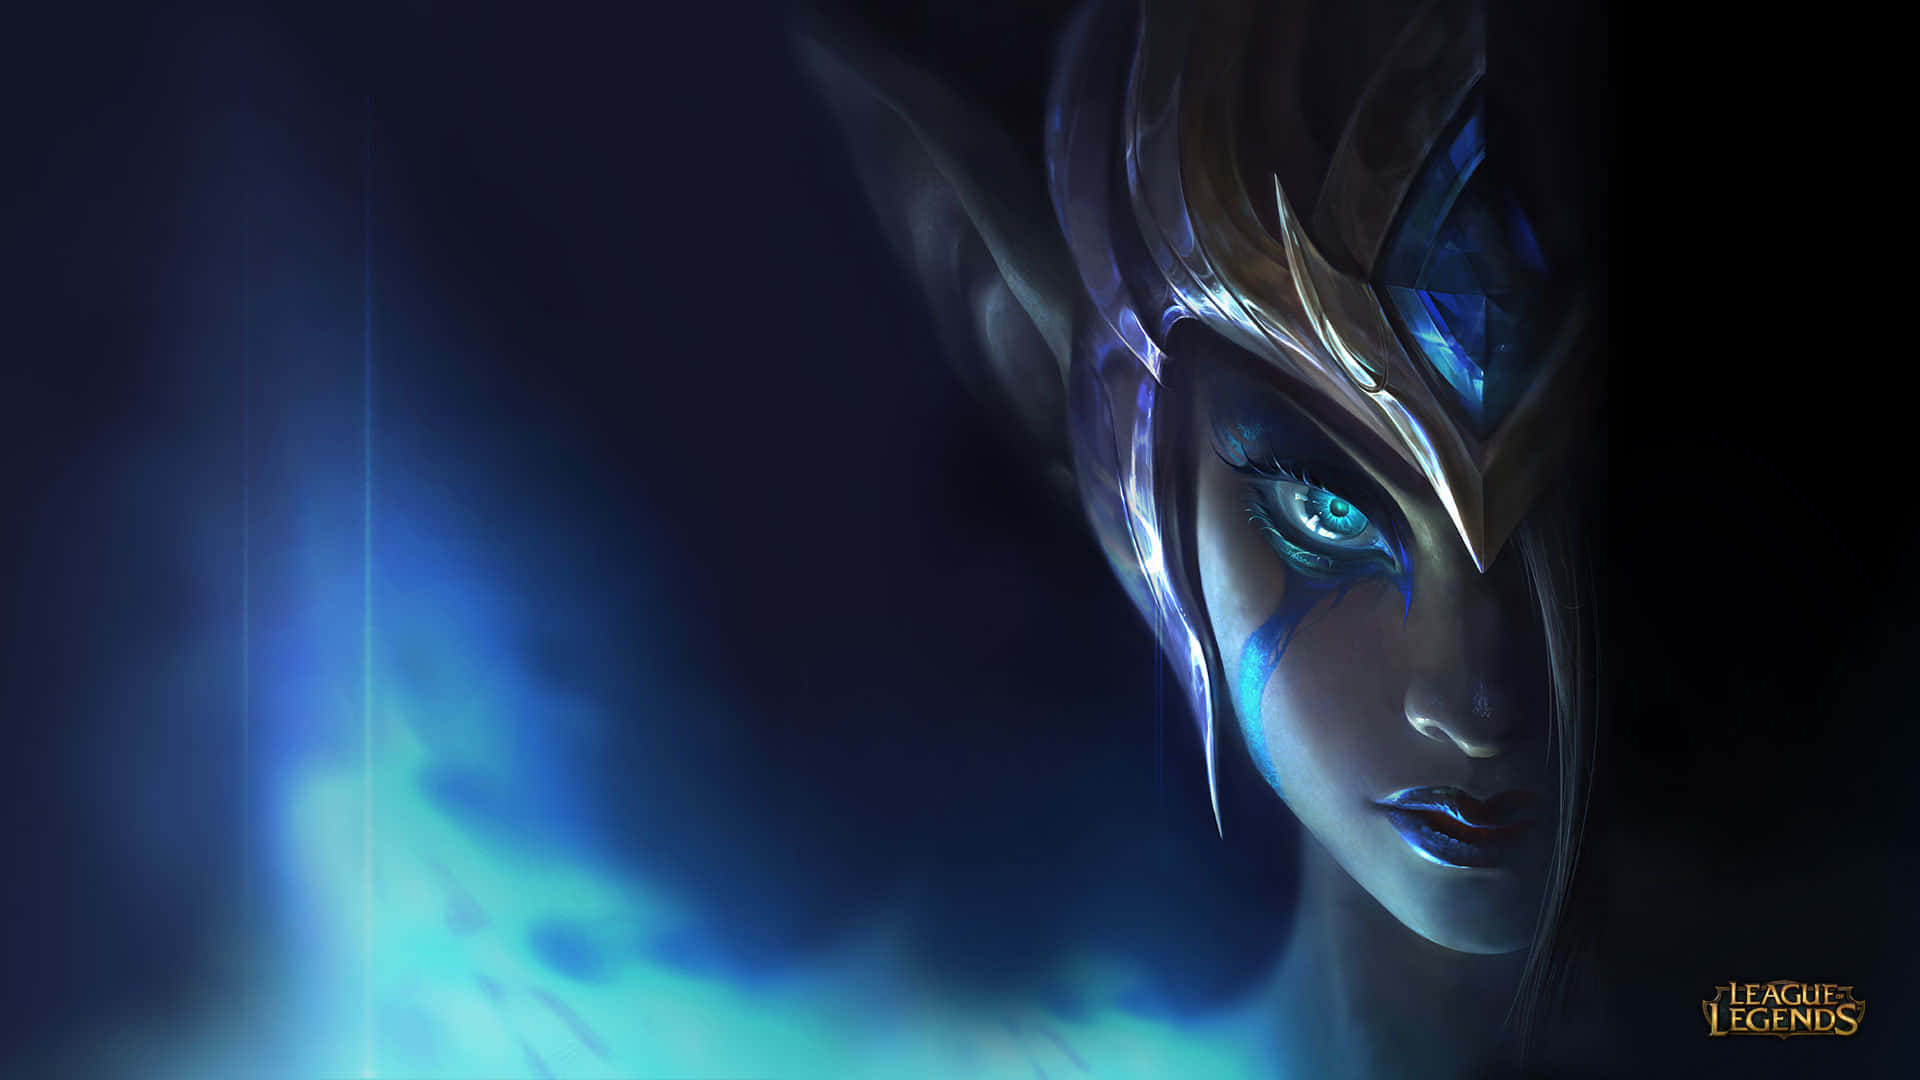 Dominate The Rift with League Of Legends